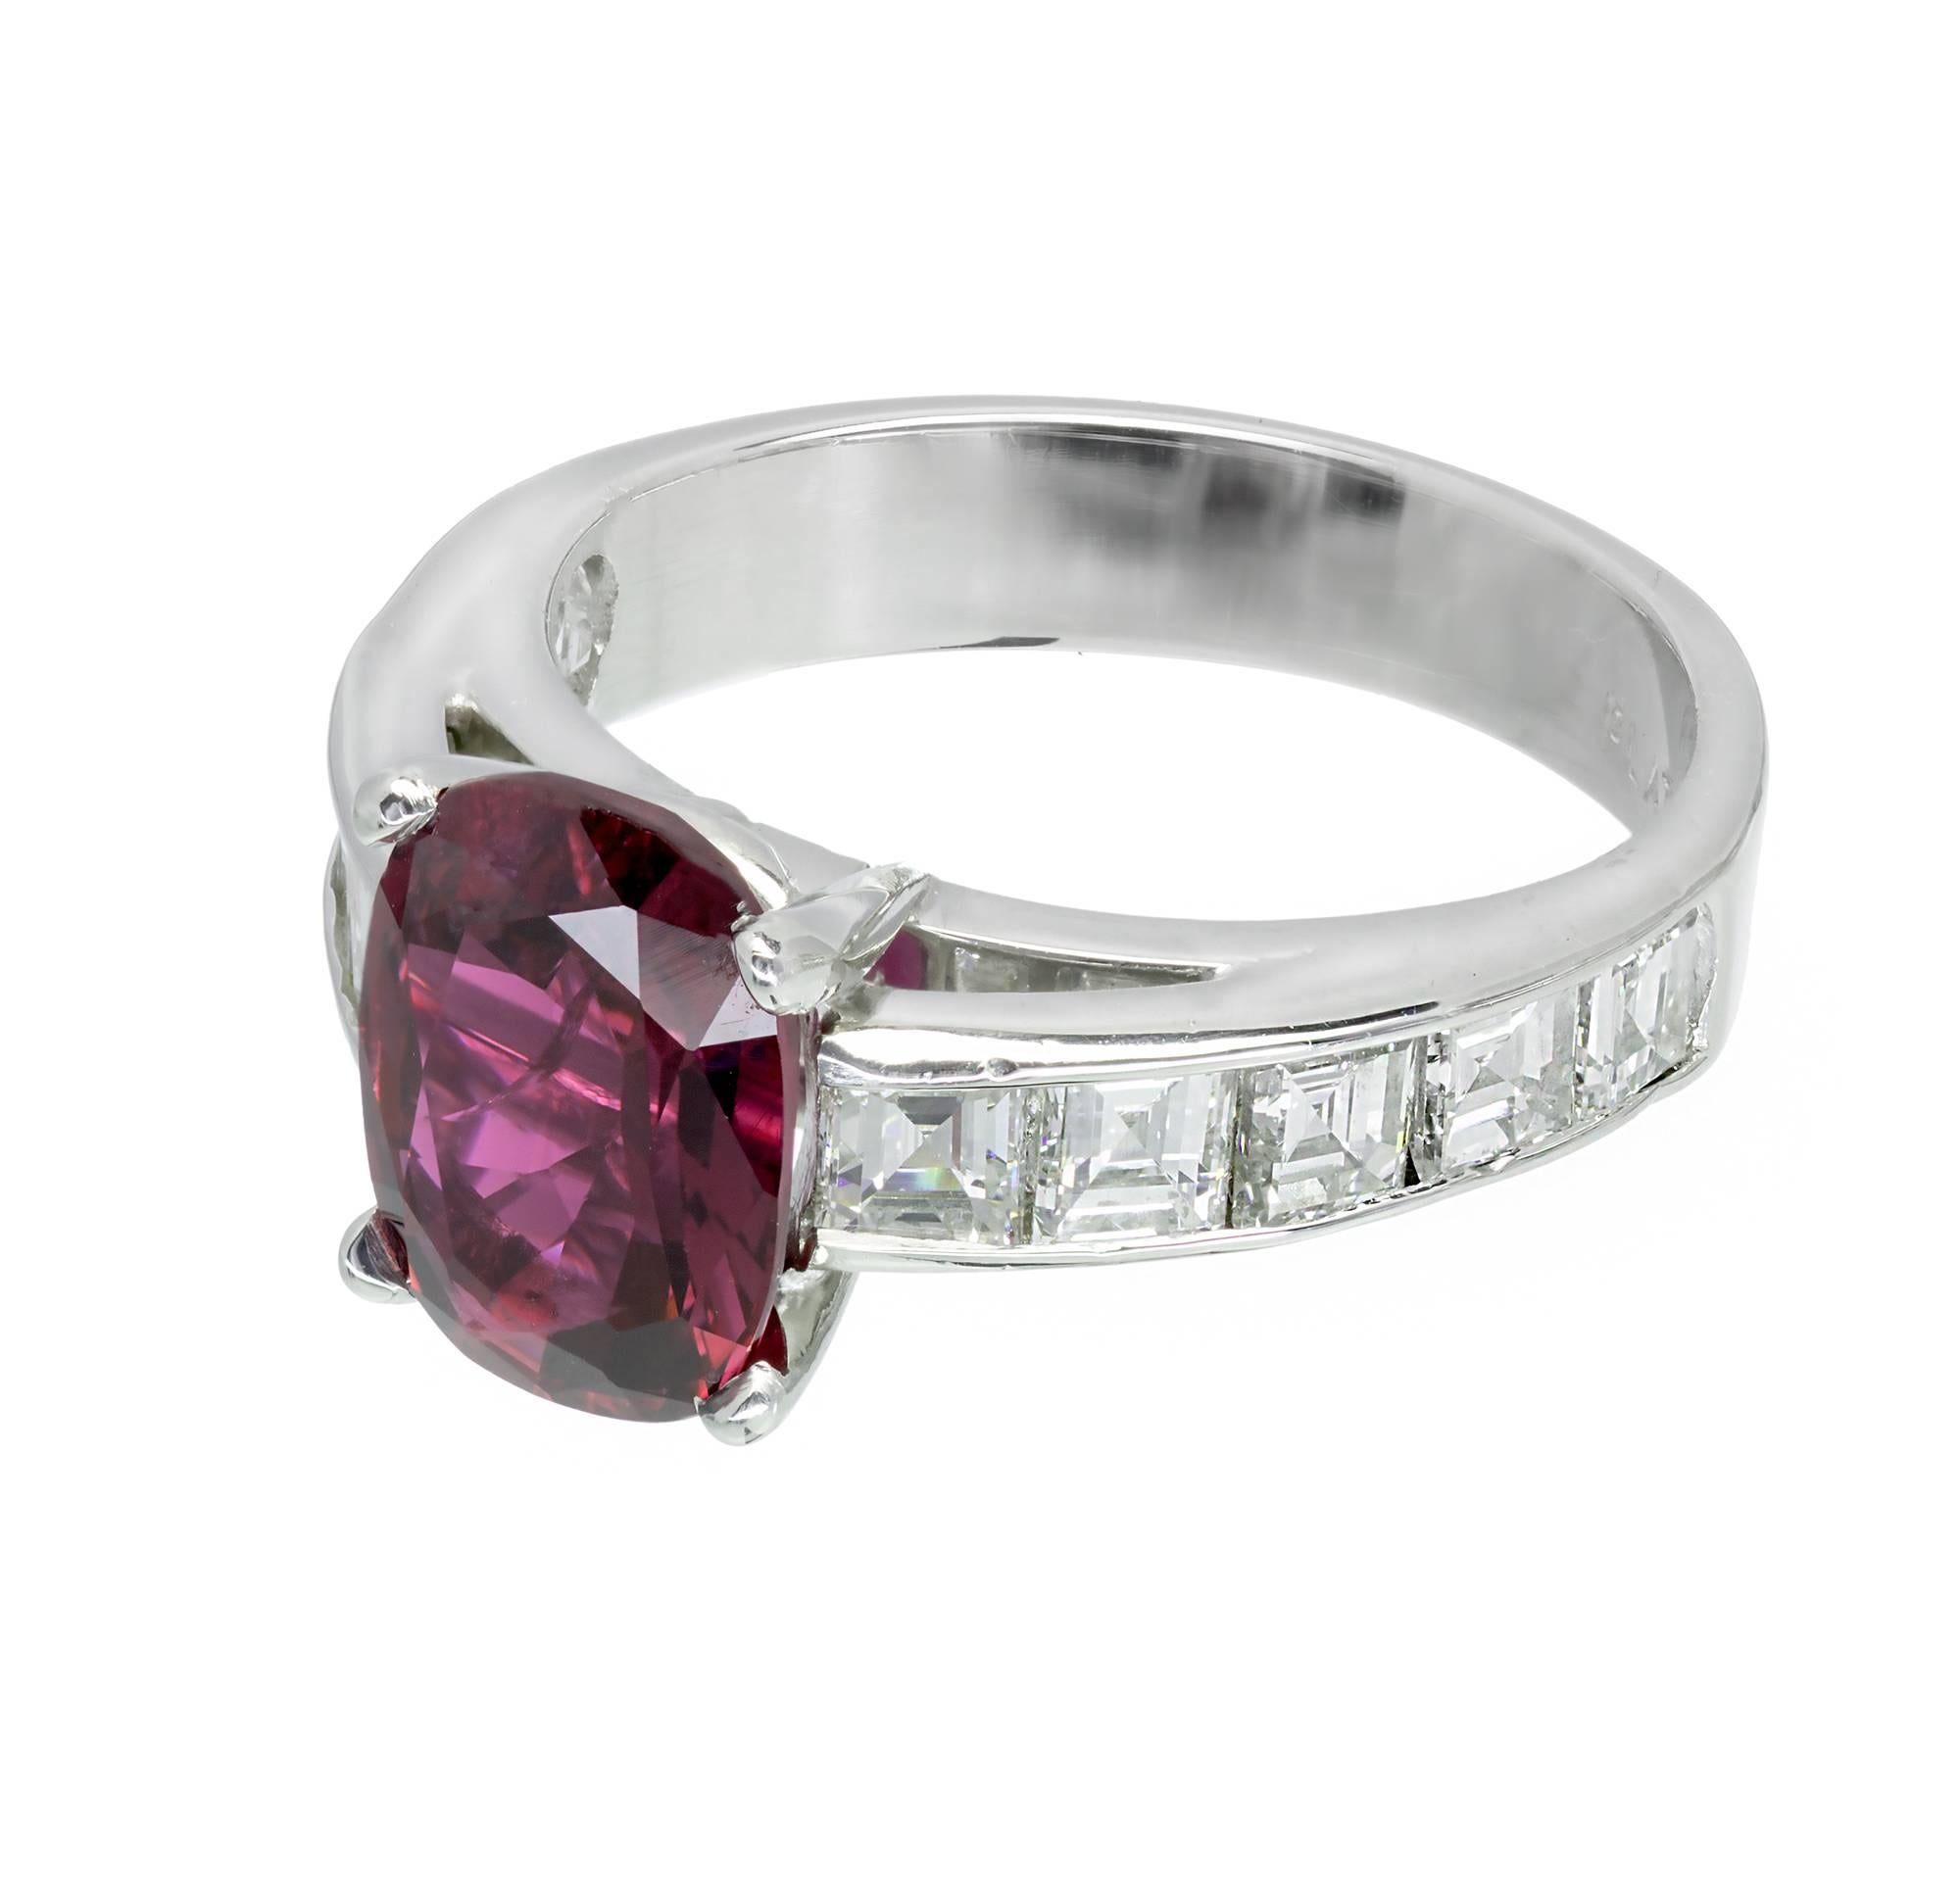 Peter Suchy Designs handmade Platinum engagement ring with square step cut channel set Diamonds and an elongated cushion cut natural no heat center Ruby. GIA certified as natural no heat no enhancements. Bright purplish red color. 

1 cushion